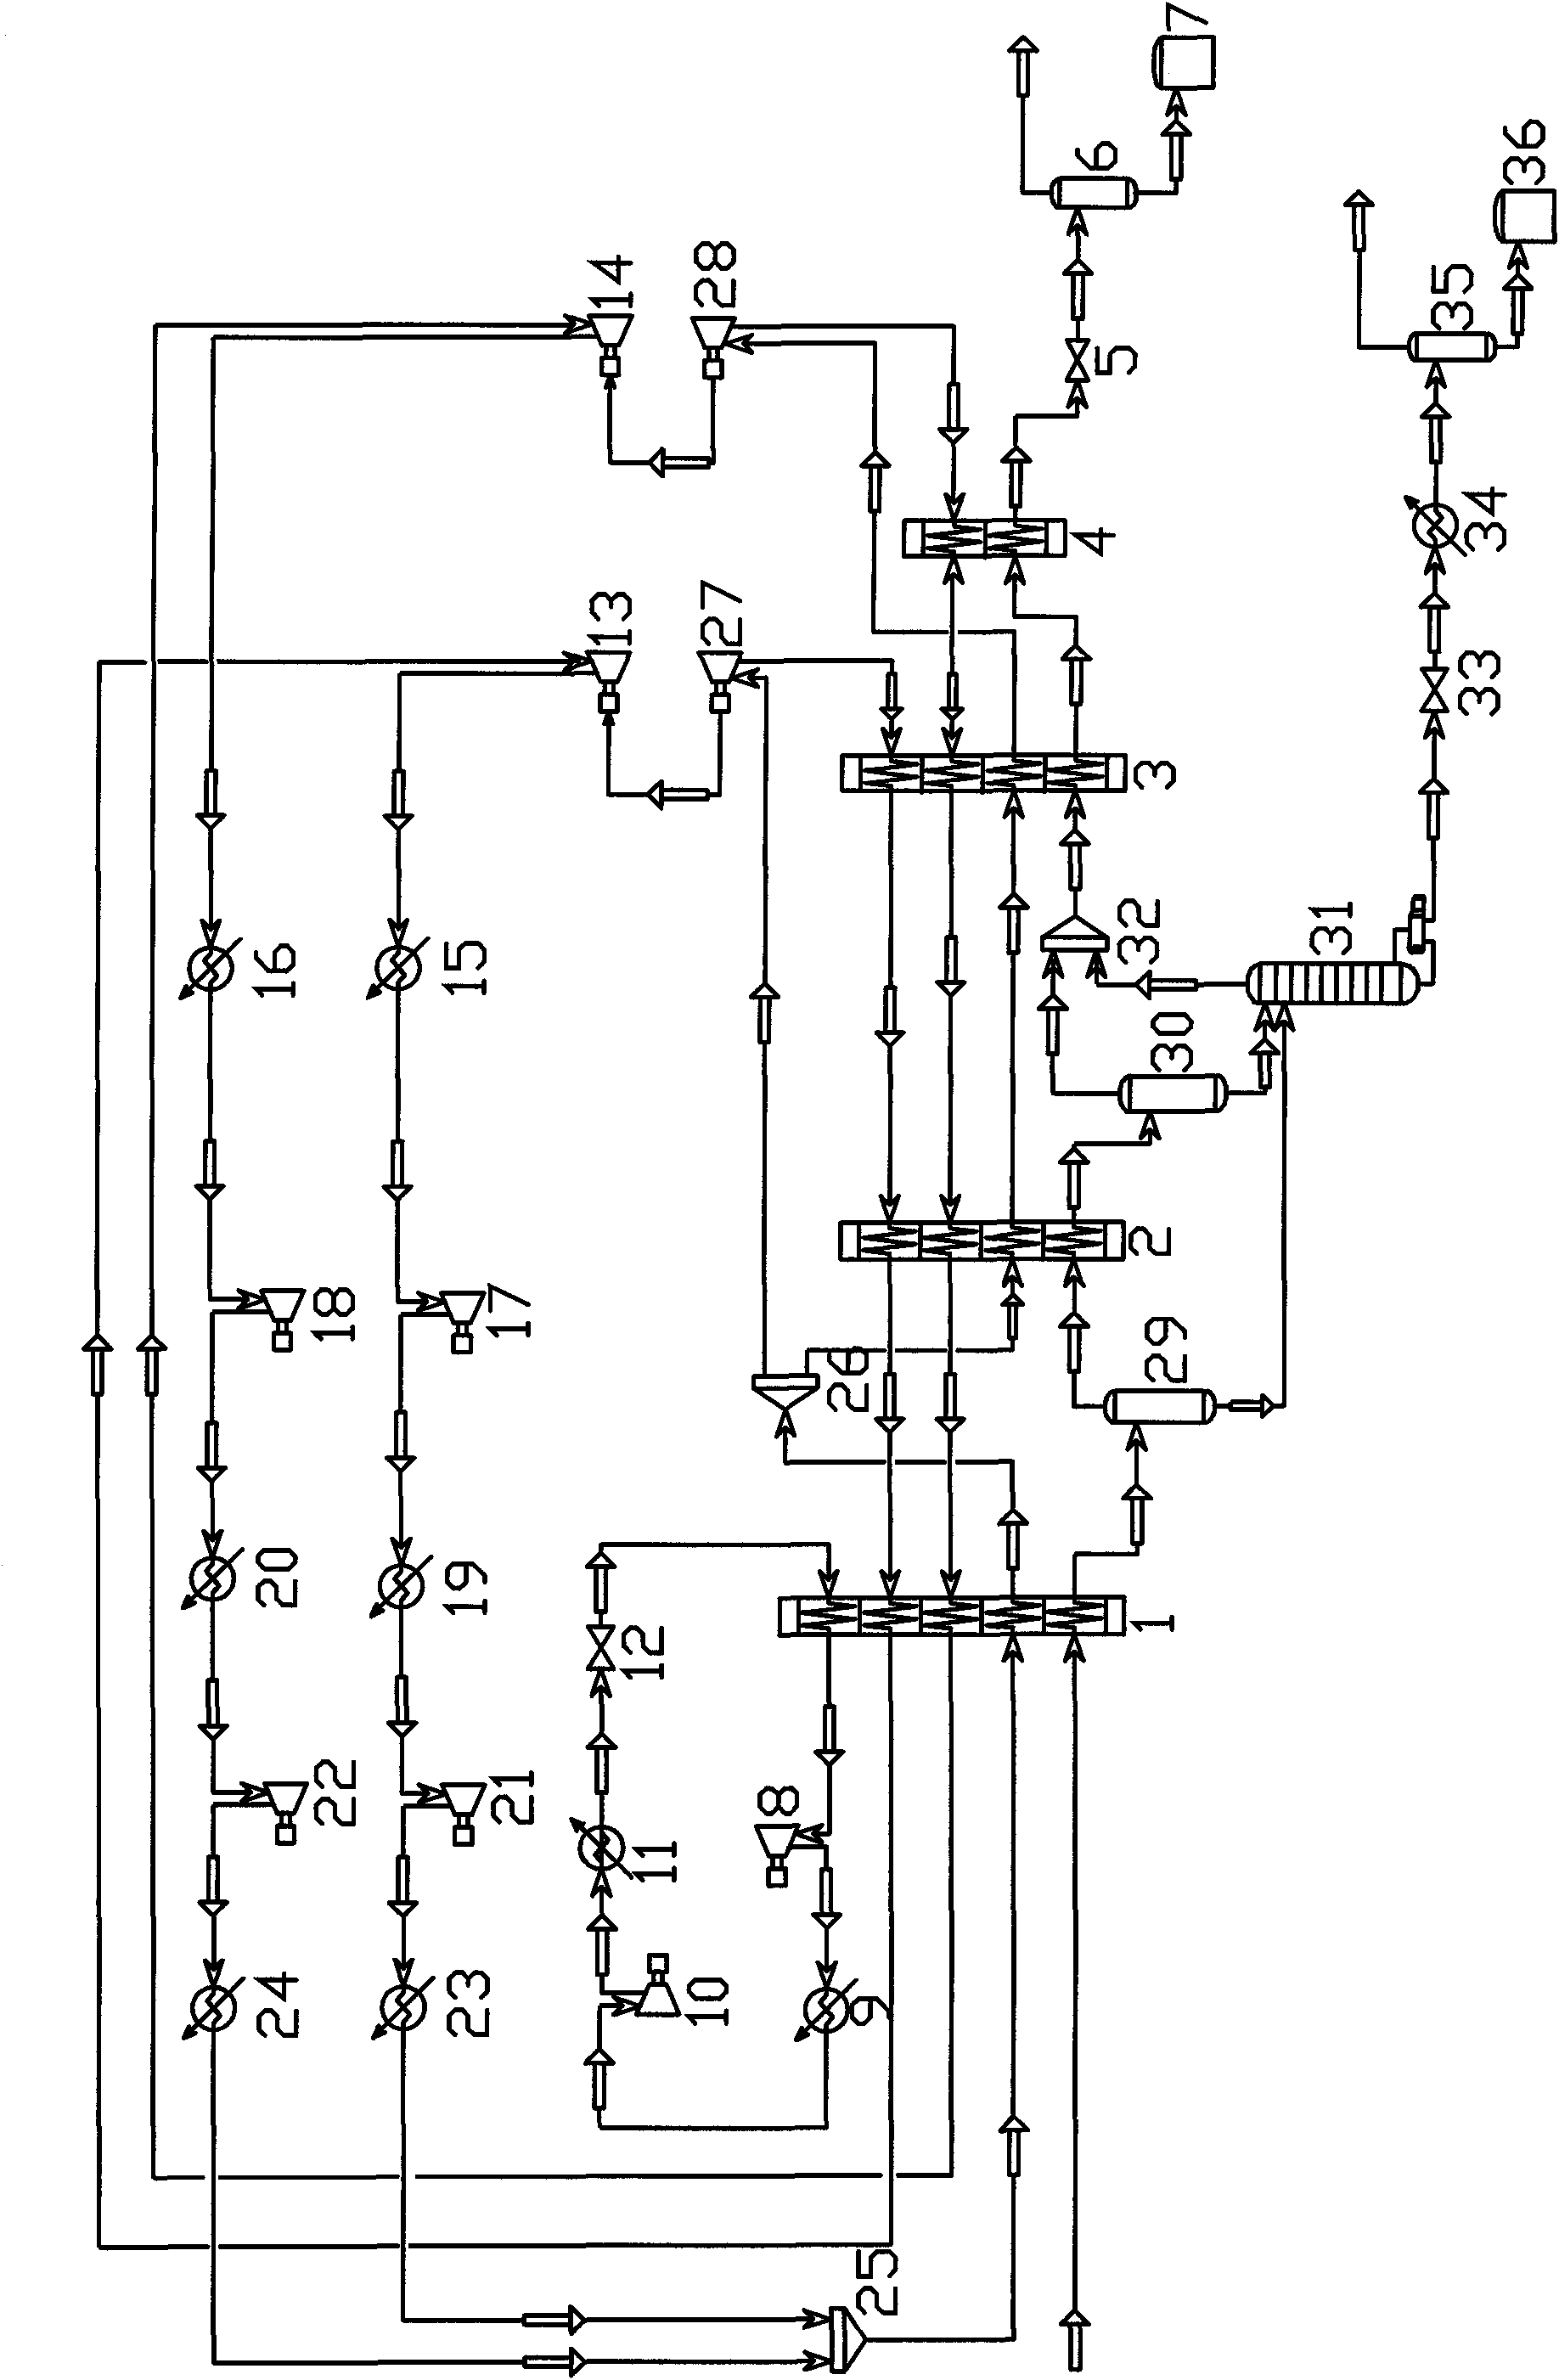 Process for compact natural gas liquefying and floating production